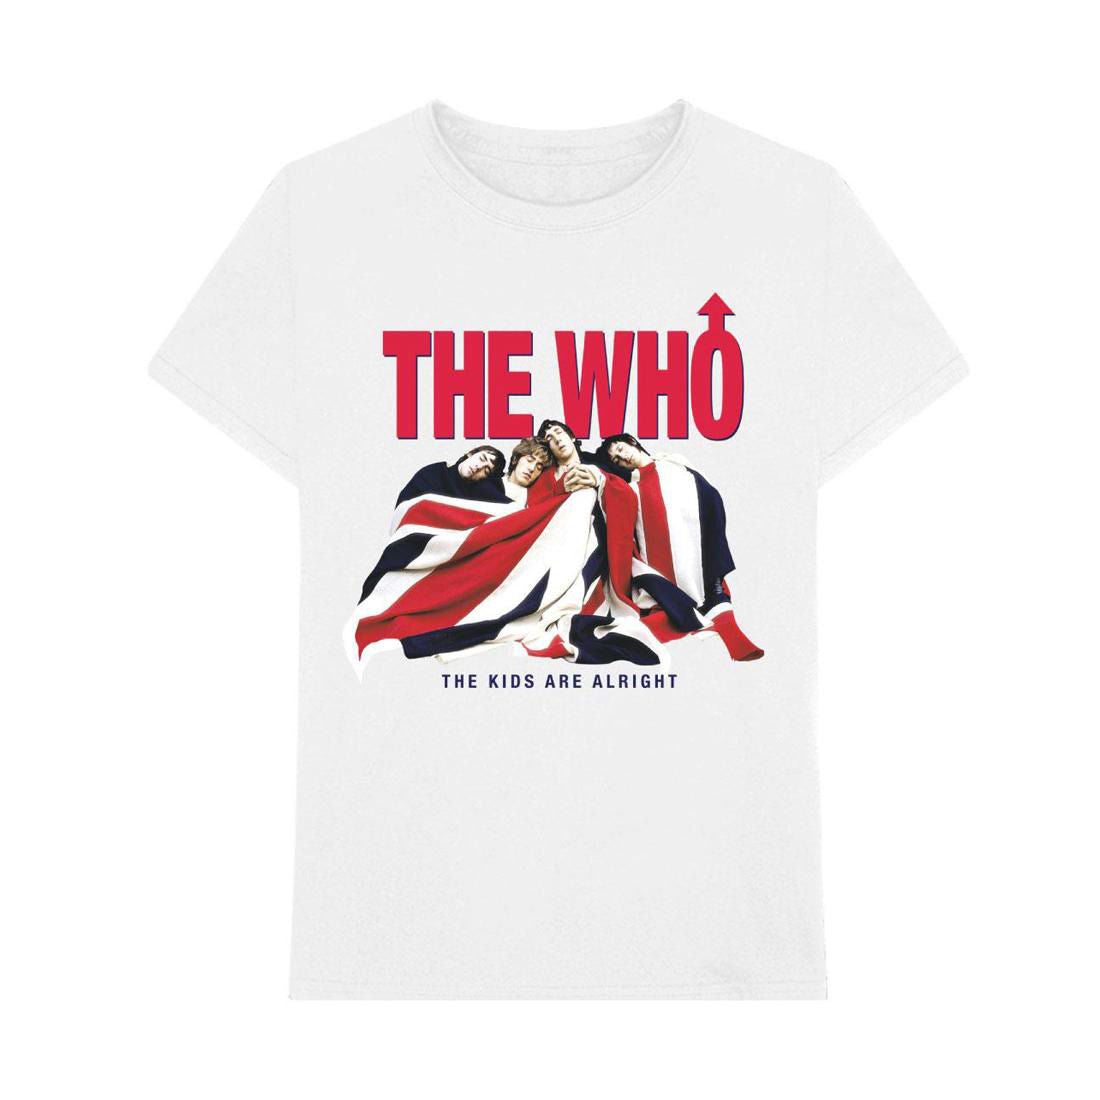 The Who - The Kids Are Alright Tee